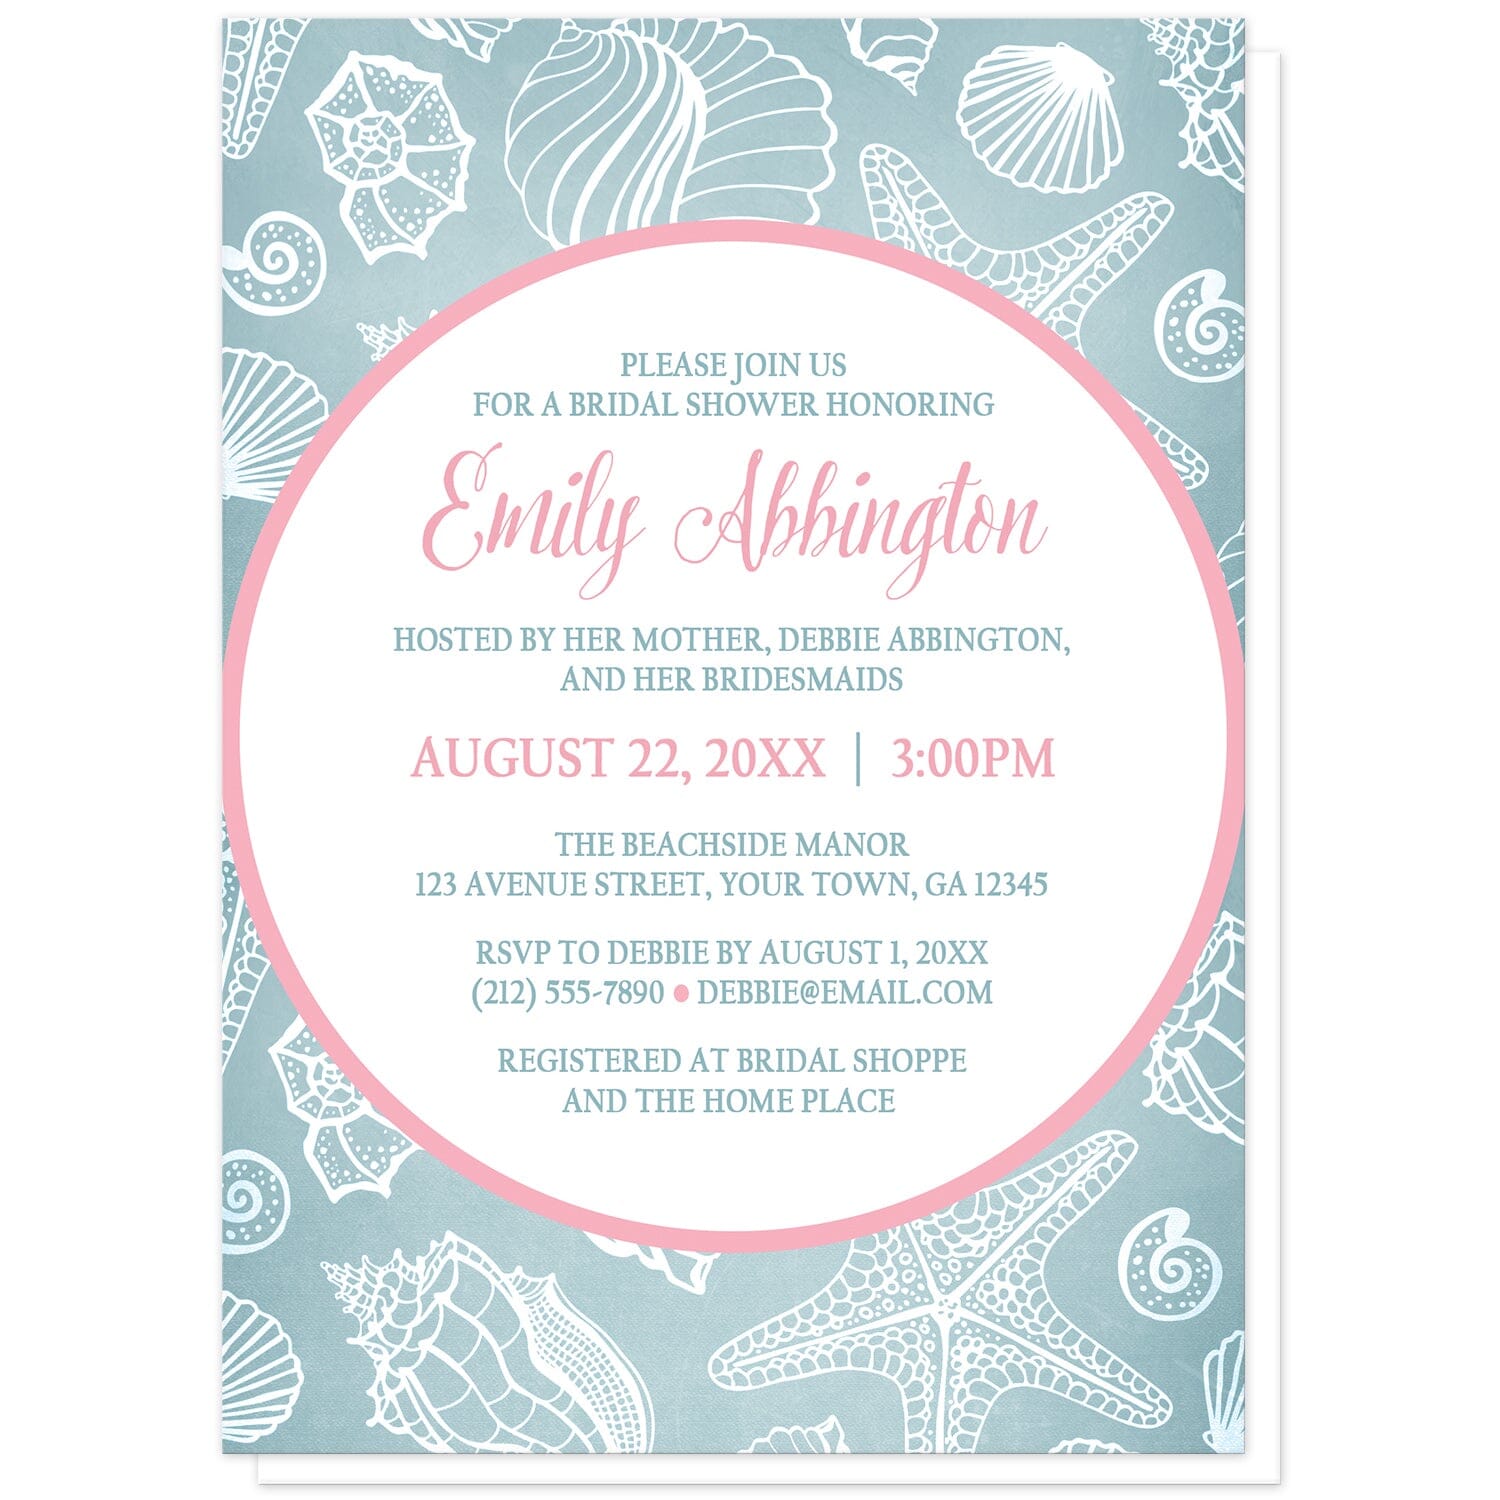 Blue Seashell Pink Beach Bridal Shower Invitations at Artistically Invited. Modern and pretty blue seashell pink beach bridal shower invitations designed with your personalized bridal shower celebration details custom printed in pink and blue inside a white circle with a pink outline over a blue and white seashell pattern background. 